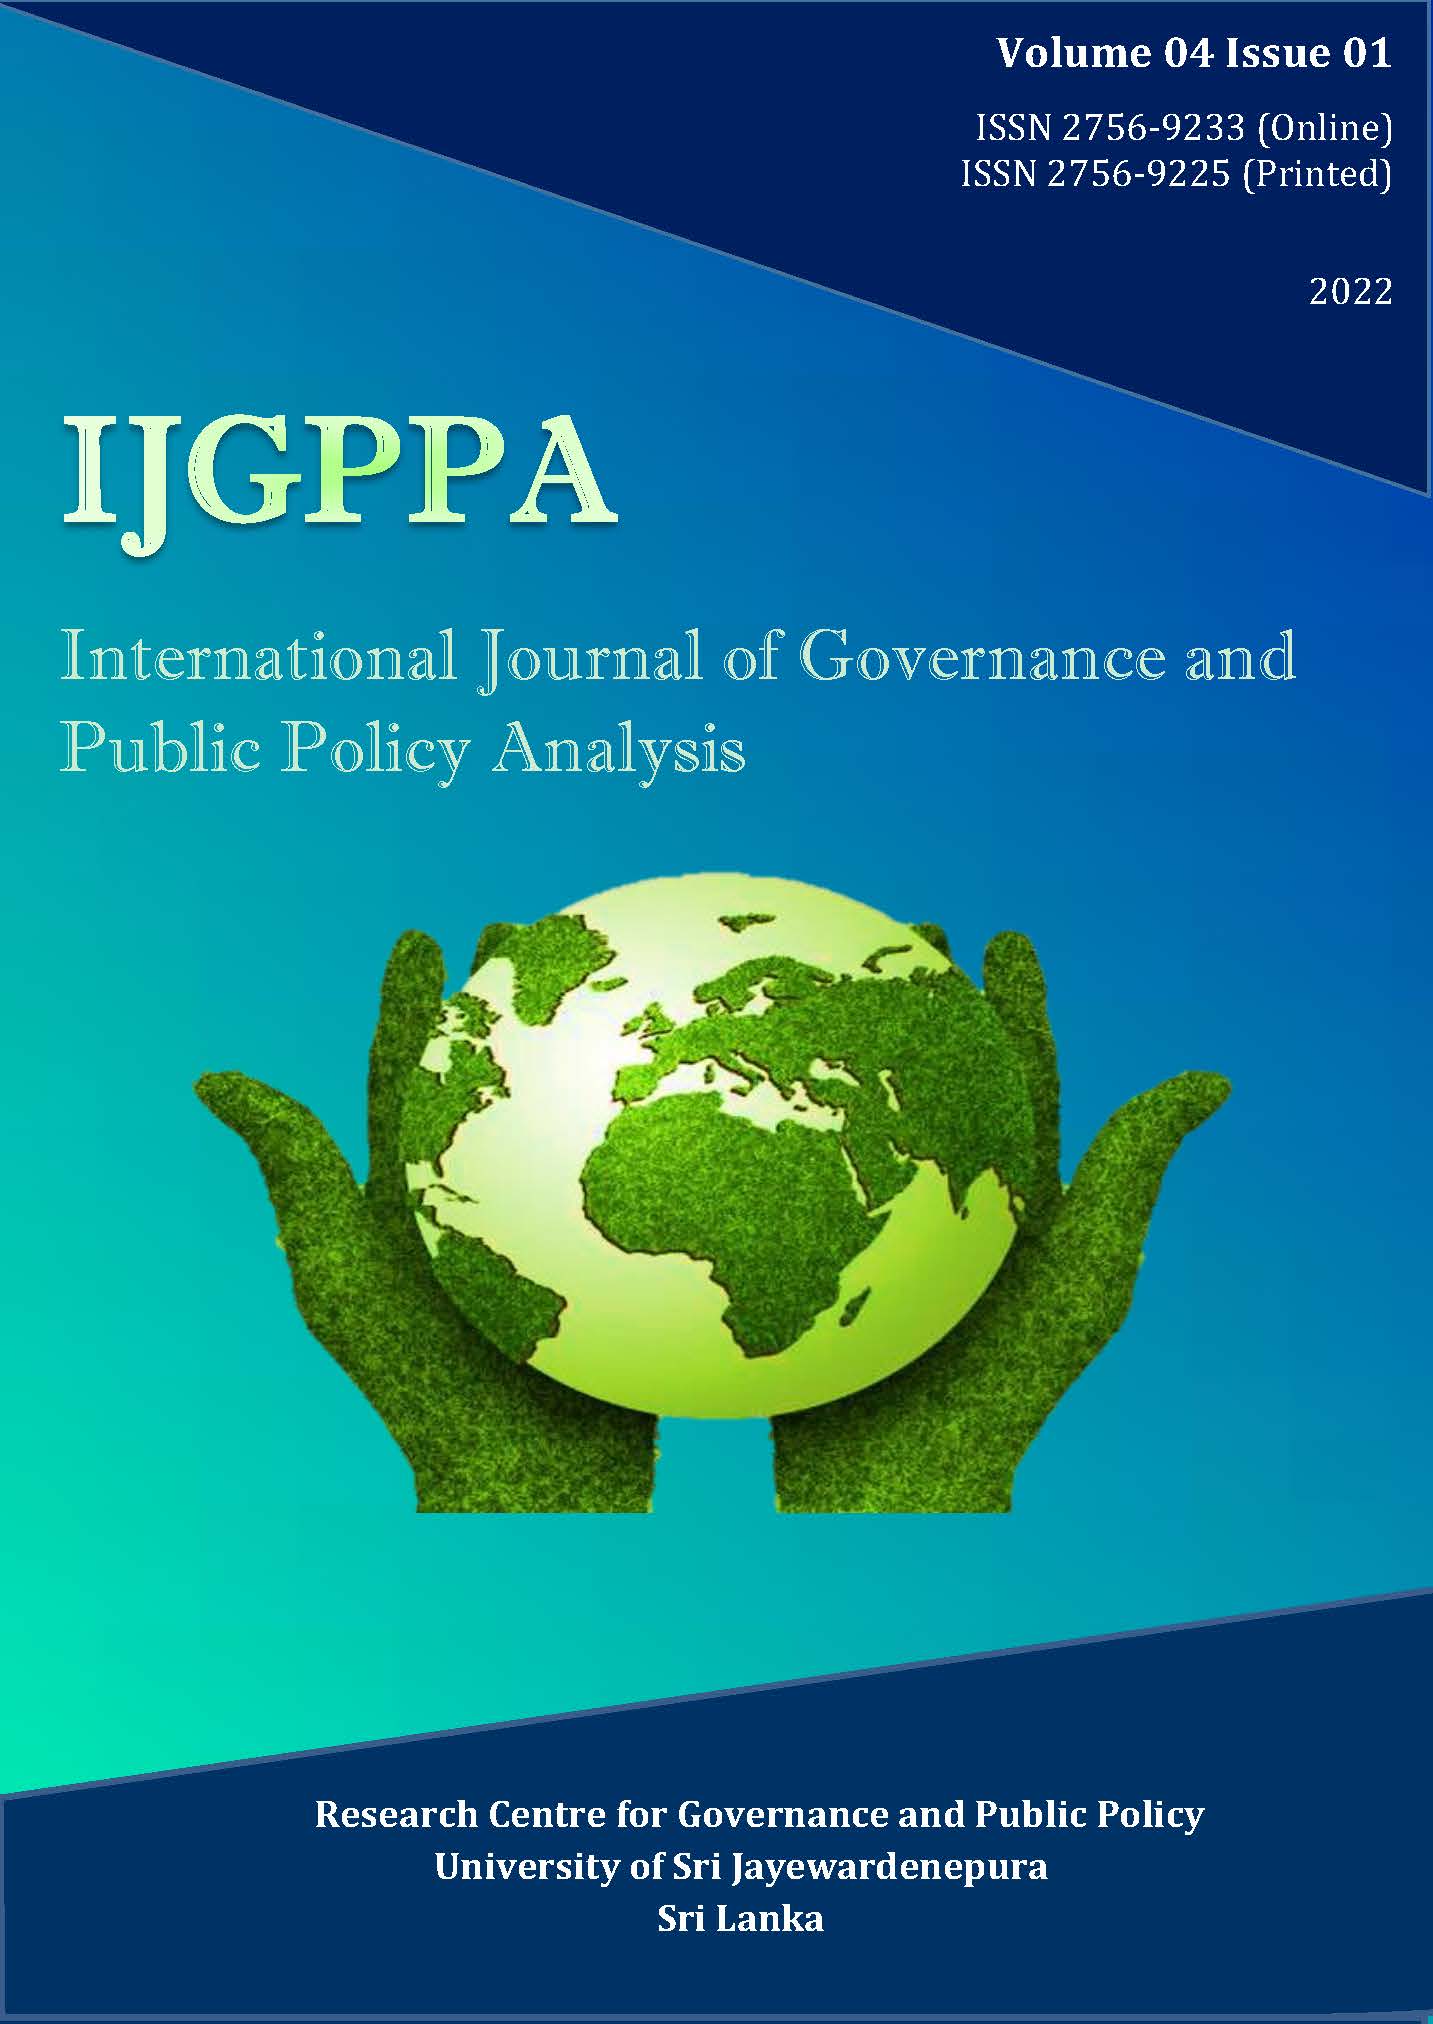 					View Vol. 4 No. 01 (2022): International Journal of Governance and Public Policy Analysis - IJGPPA 
				